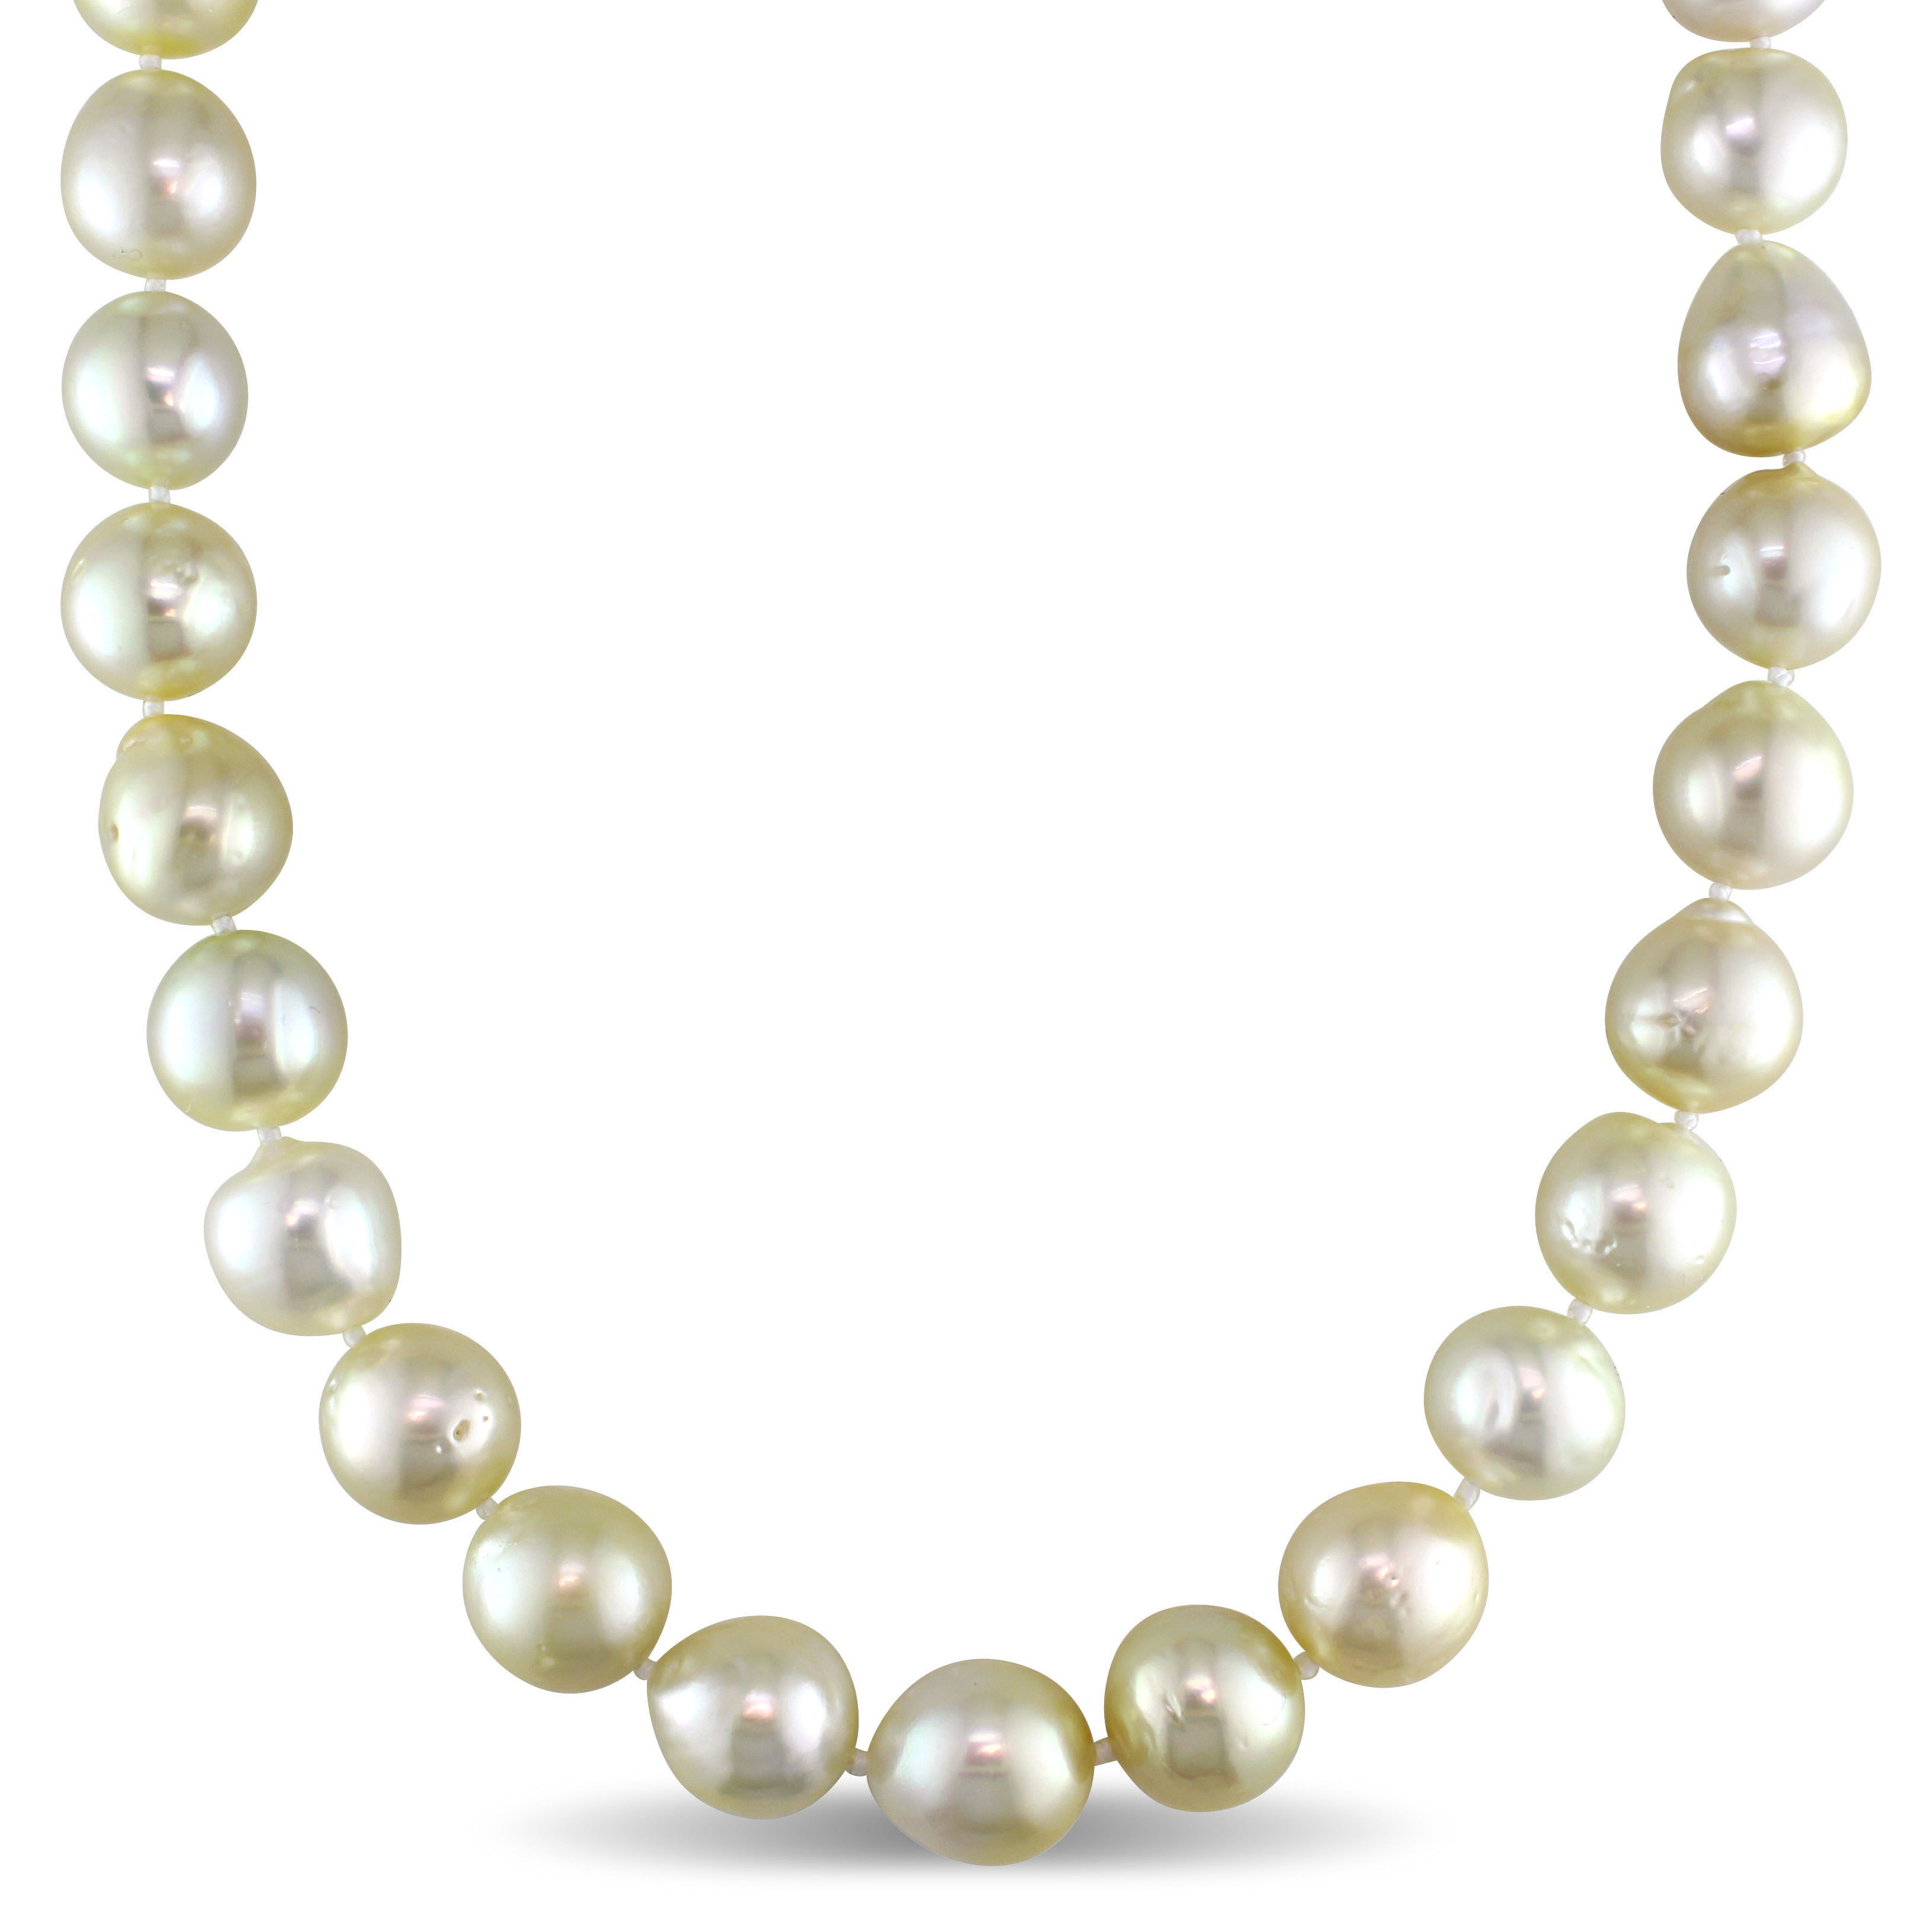 11-12 MM Natural Shape Golden South Sea Pearl Strand Necklace with 14k  Yellow Gold Clasp - 18 in - CBG001204